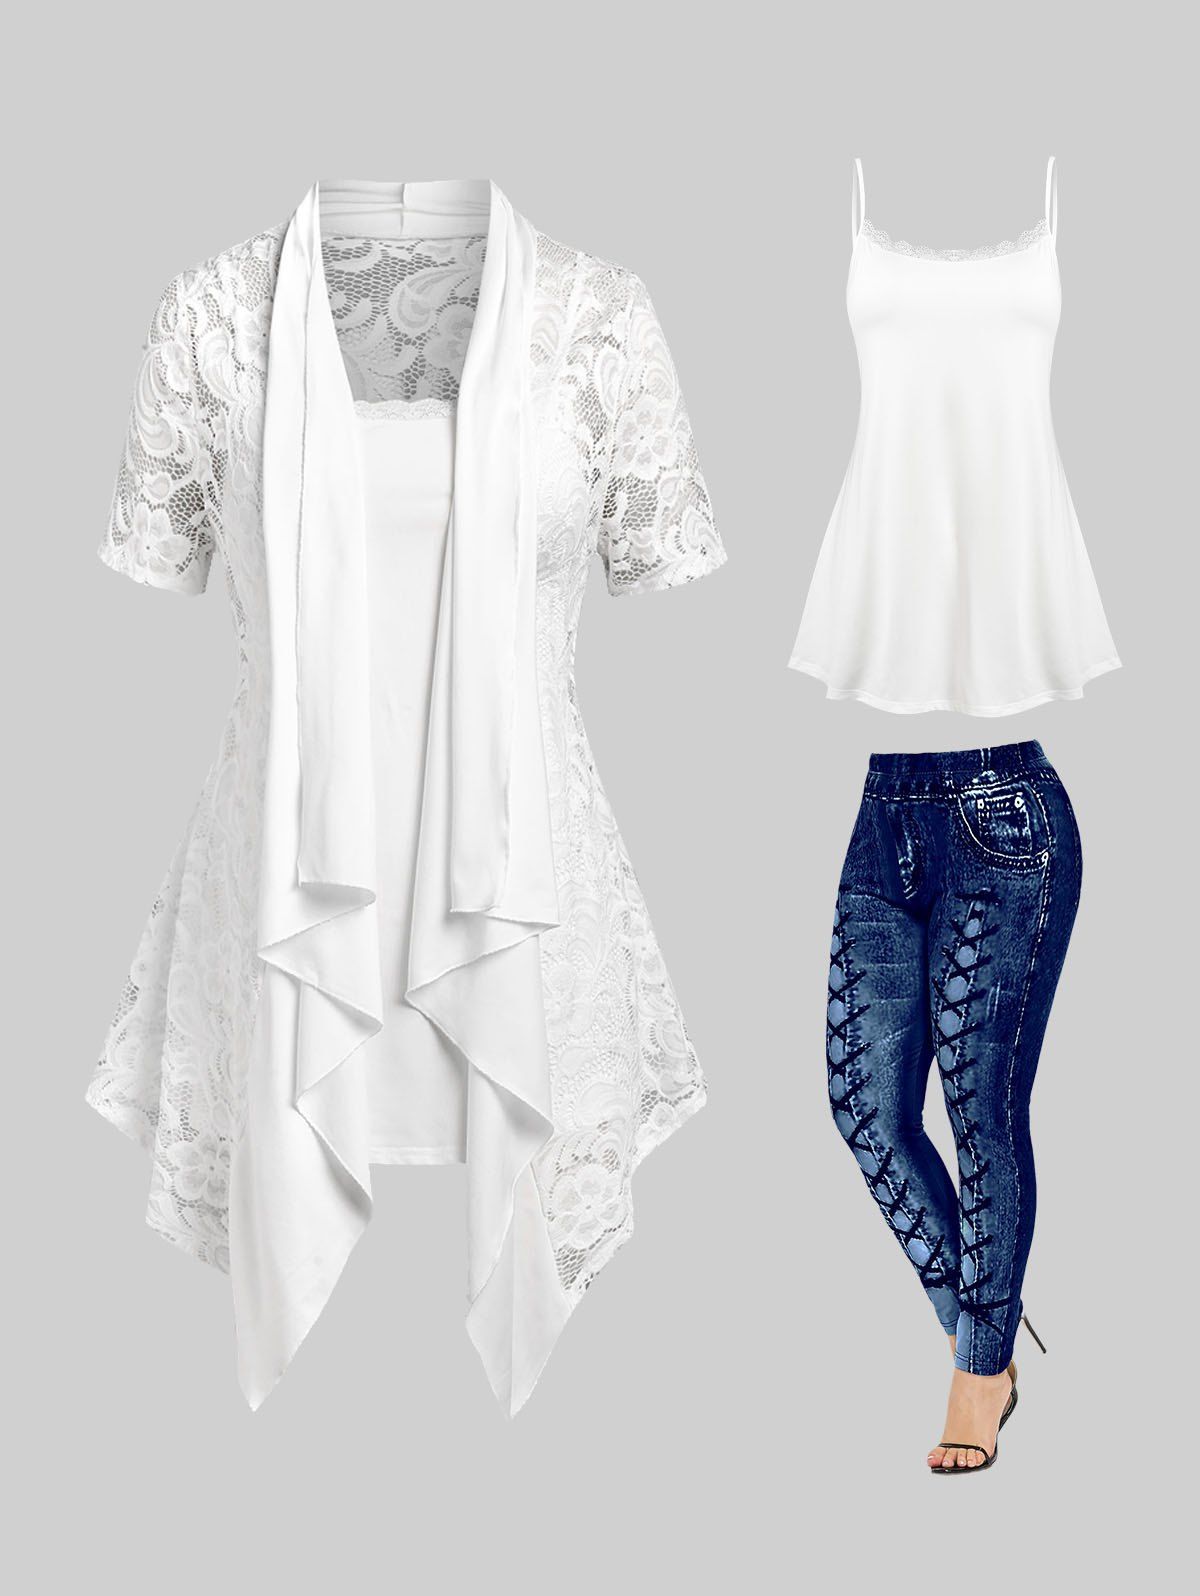 Chic Asymmetric Lace Draped Cardigan Set and Leggings Plus Size Summer Outfit  